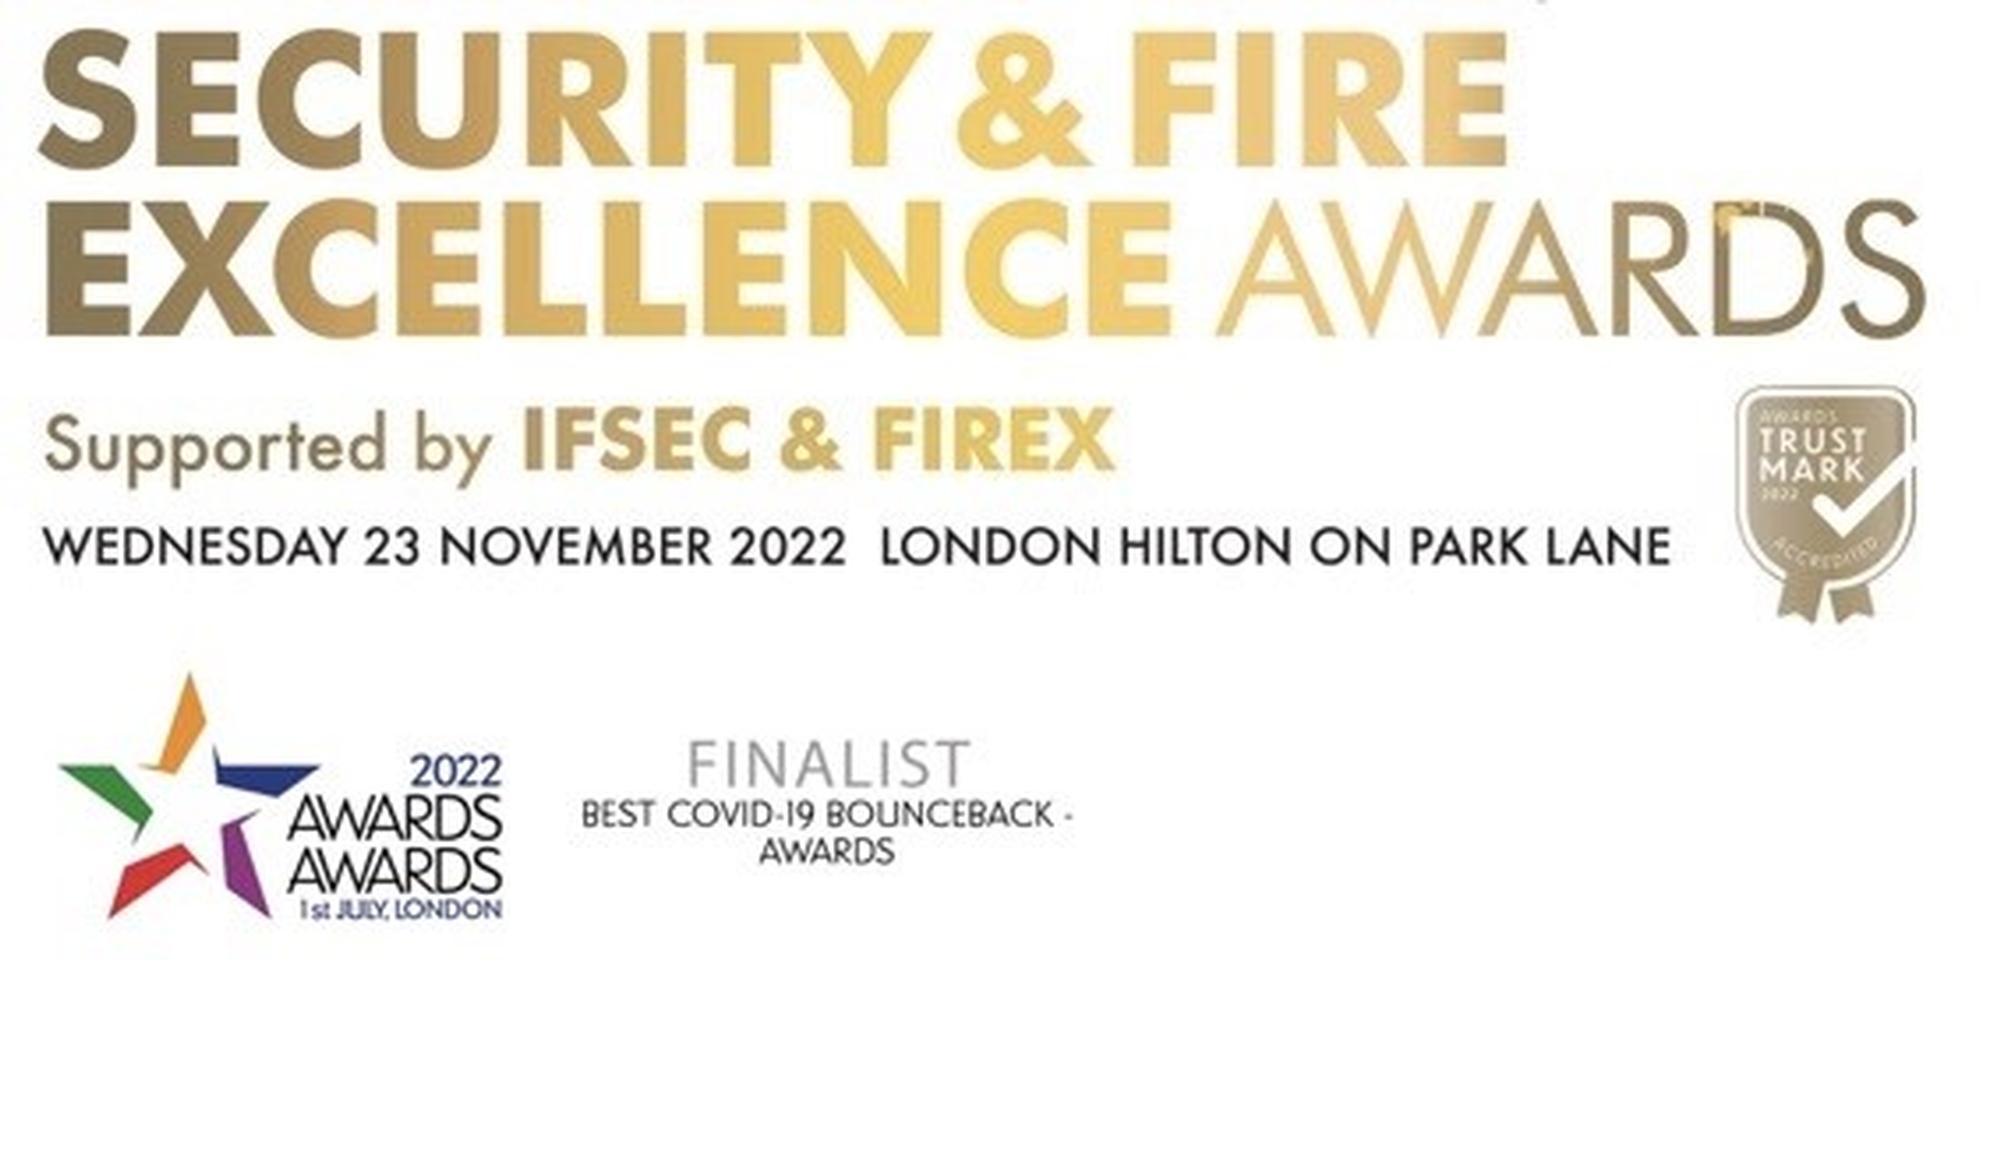 Security & Fire Excellence Awards 2022